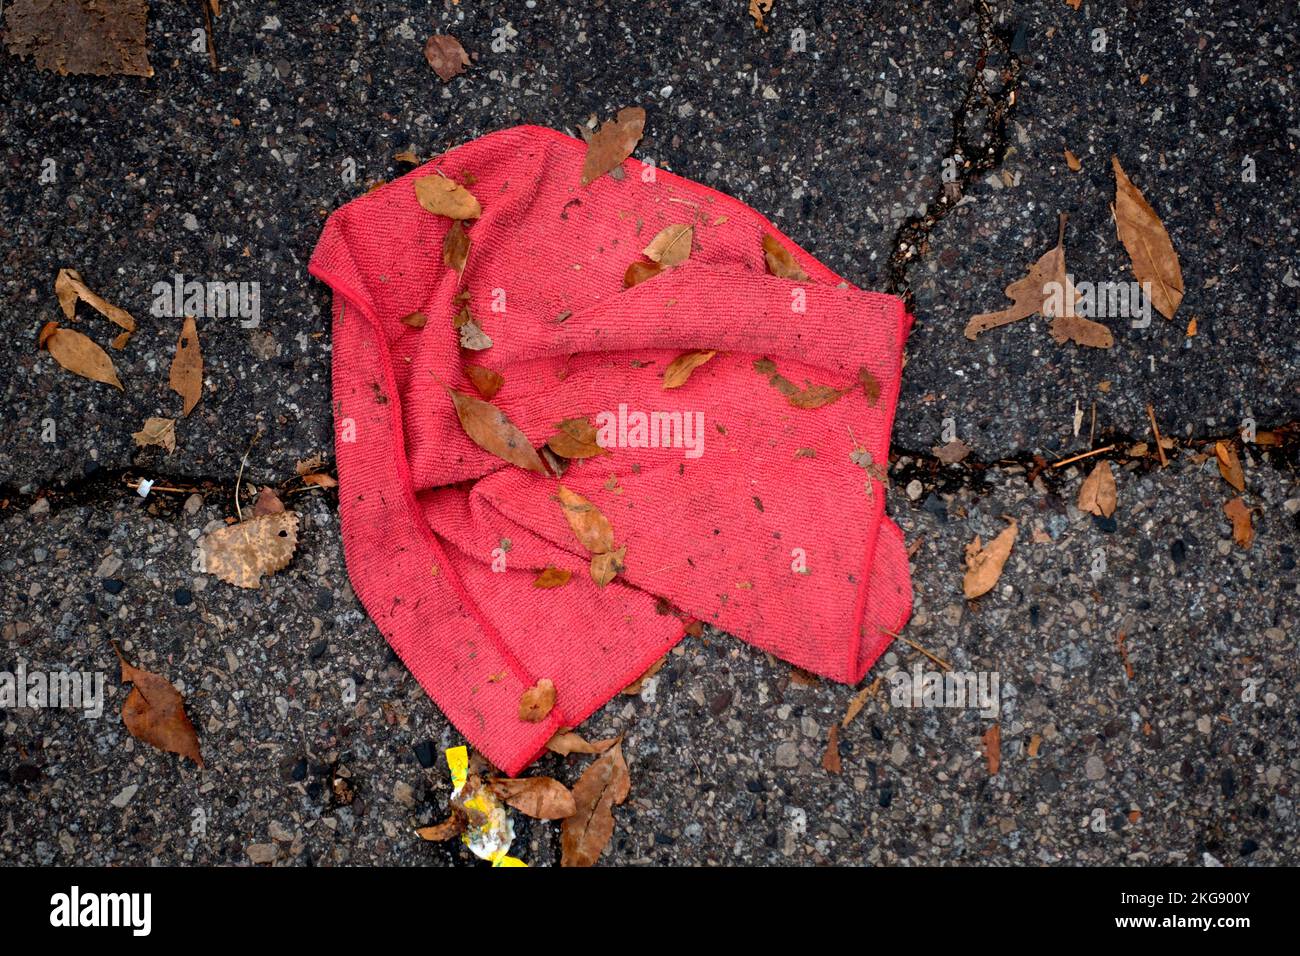 Red cleaning cloth found in the street among a few autumn leaves. St Paul Minnesota MN USA Stock Photo